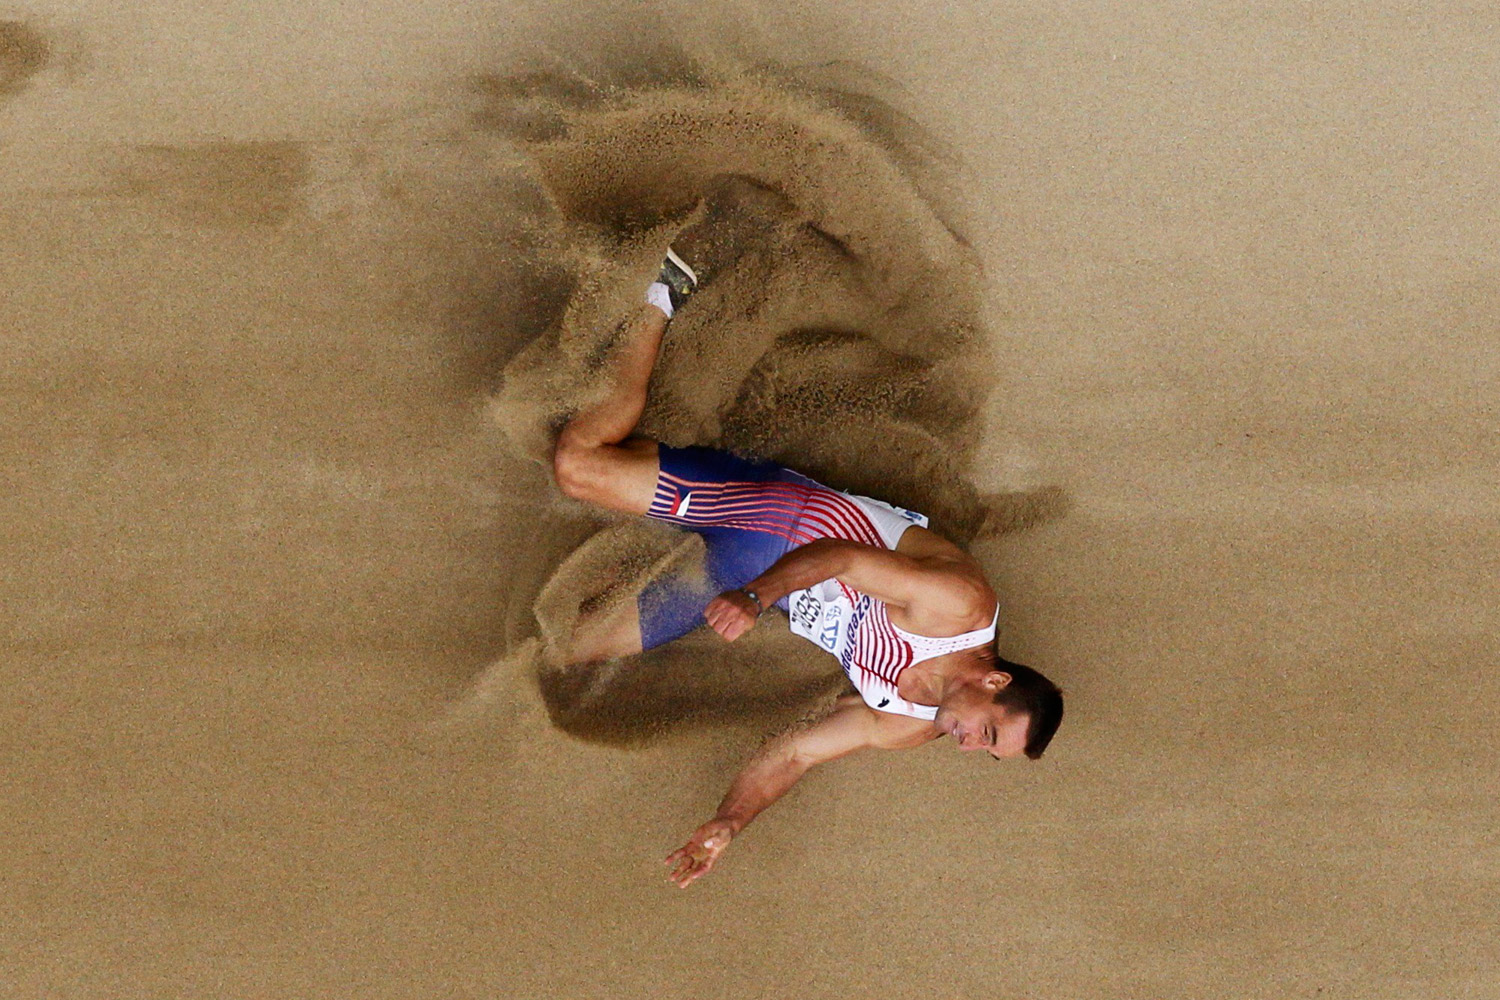 Roman Sebrle of the Czech Republic competes during the long jump event of the men's decathlon at the IAAF World Athletics Championships in Daegu, South Korea, August 27, 2011.